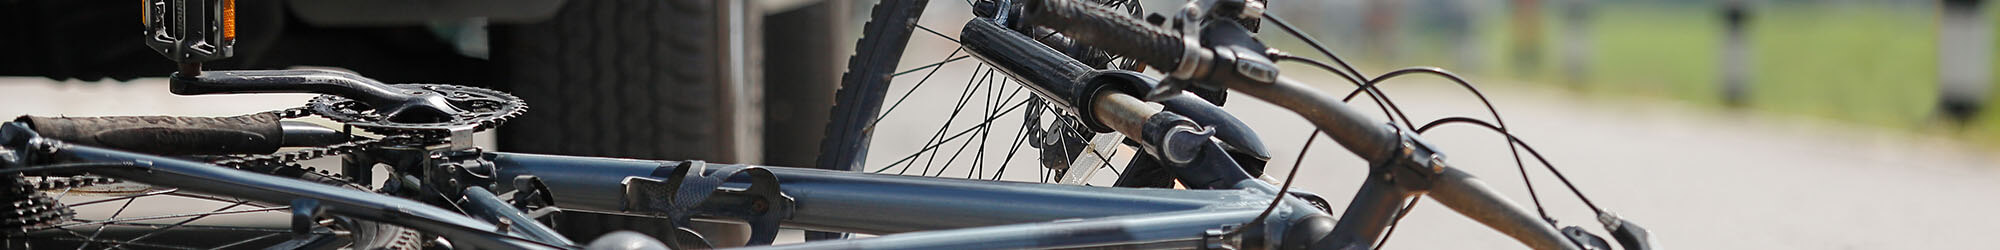 bicycle accident attorneys in Morrow, GA